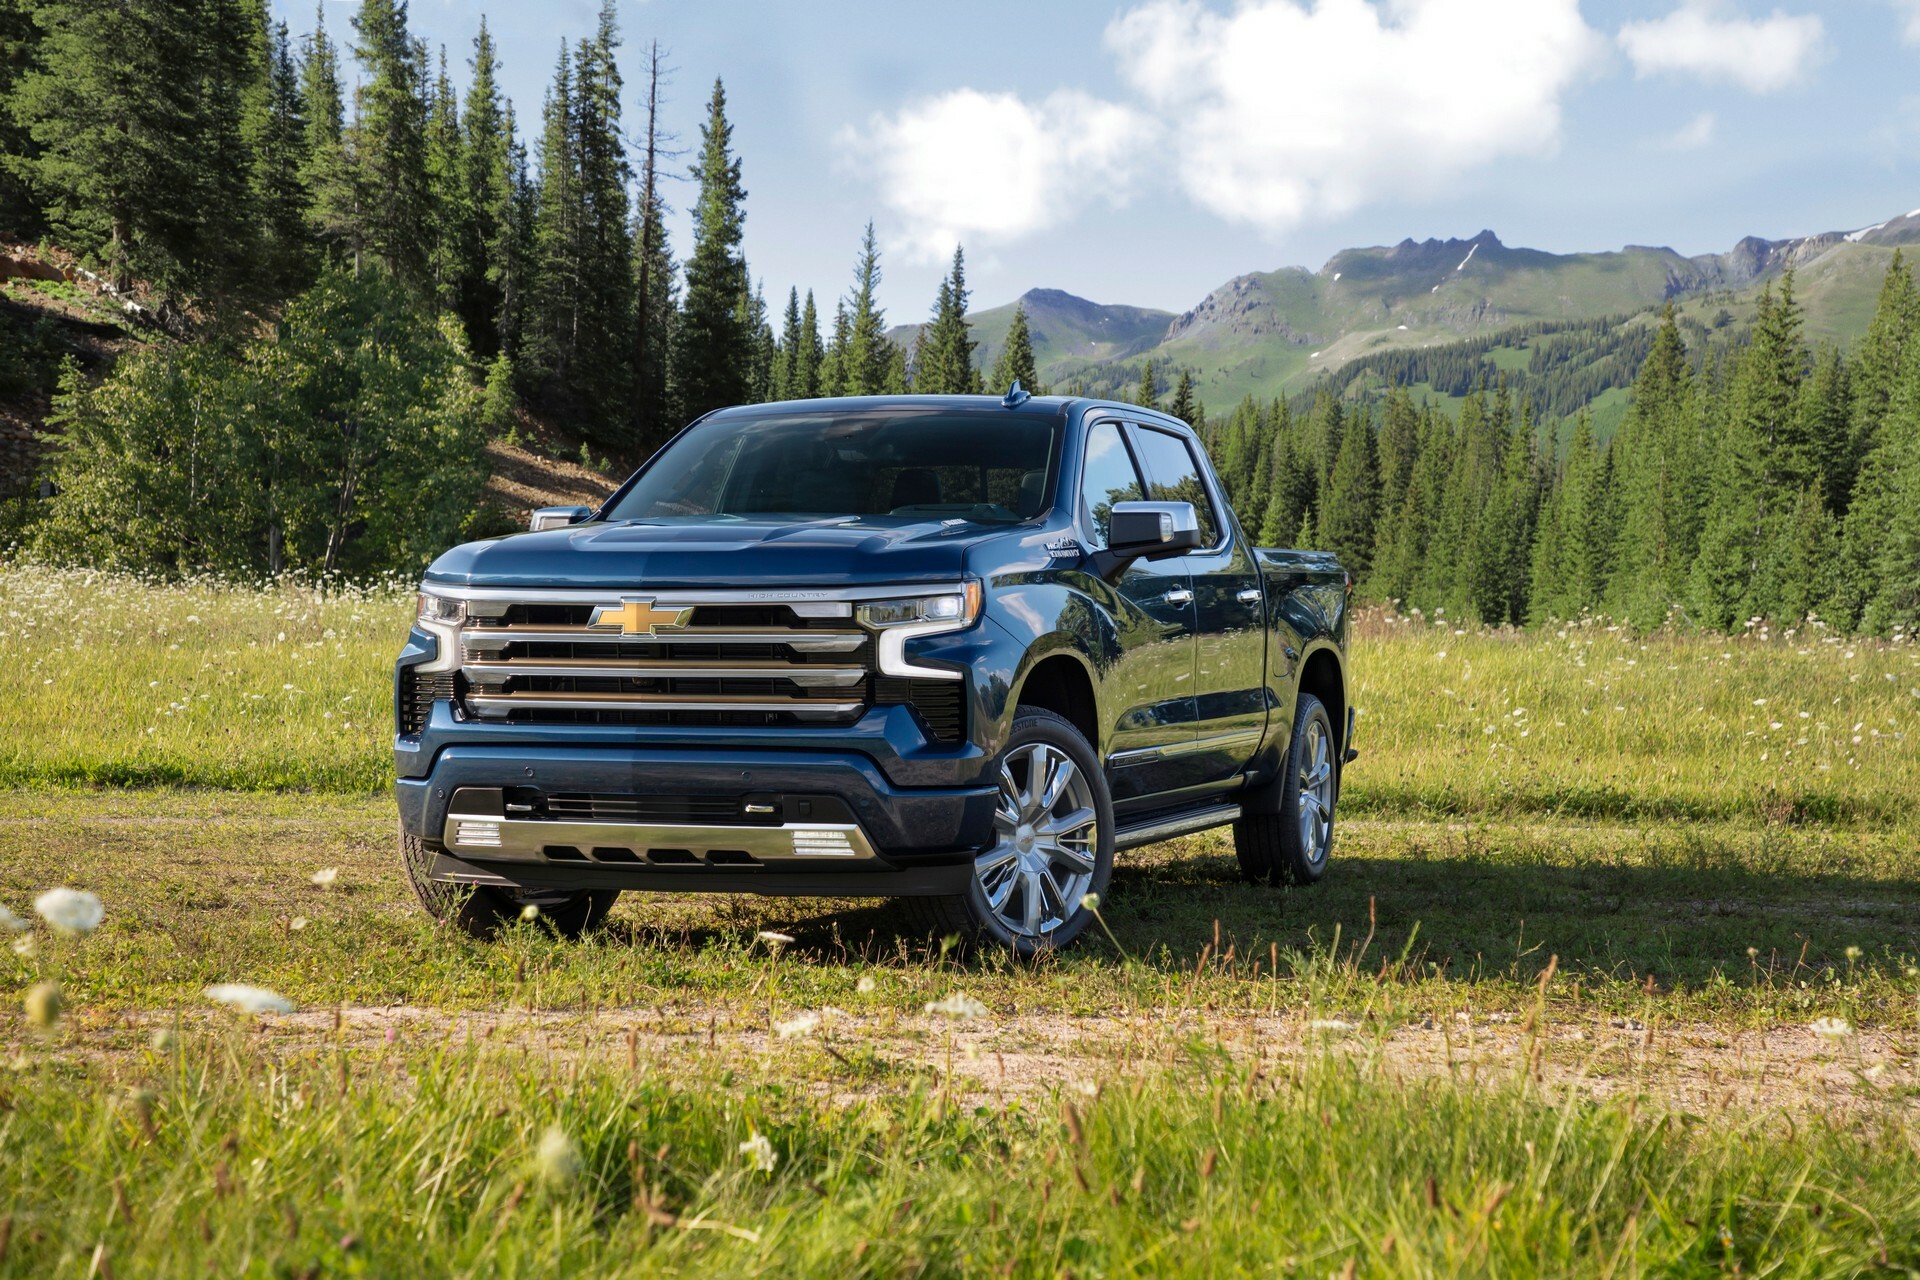 Chevrolet Silverado: High Country, Crew cab with four-wheel drive, Designed for serious off-road action. 1920x1280 HD Background.